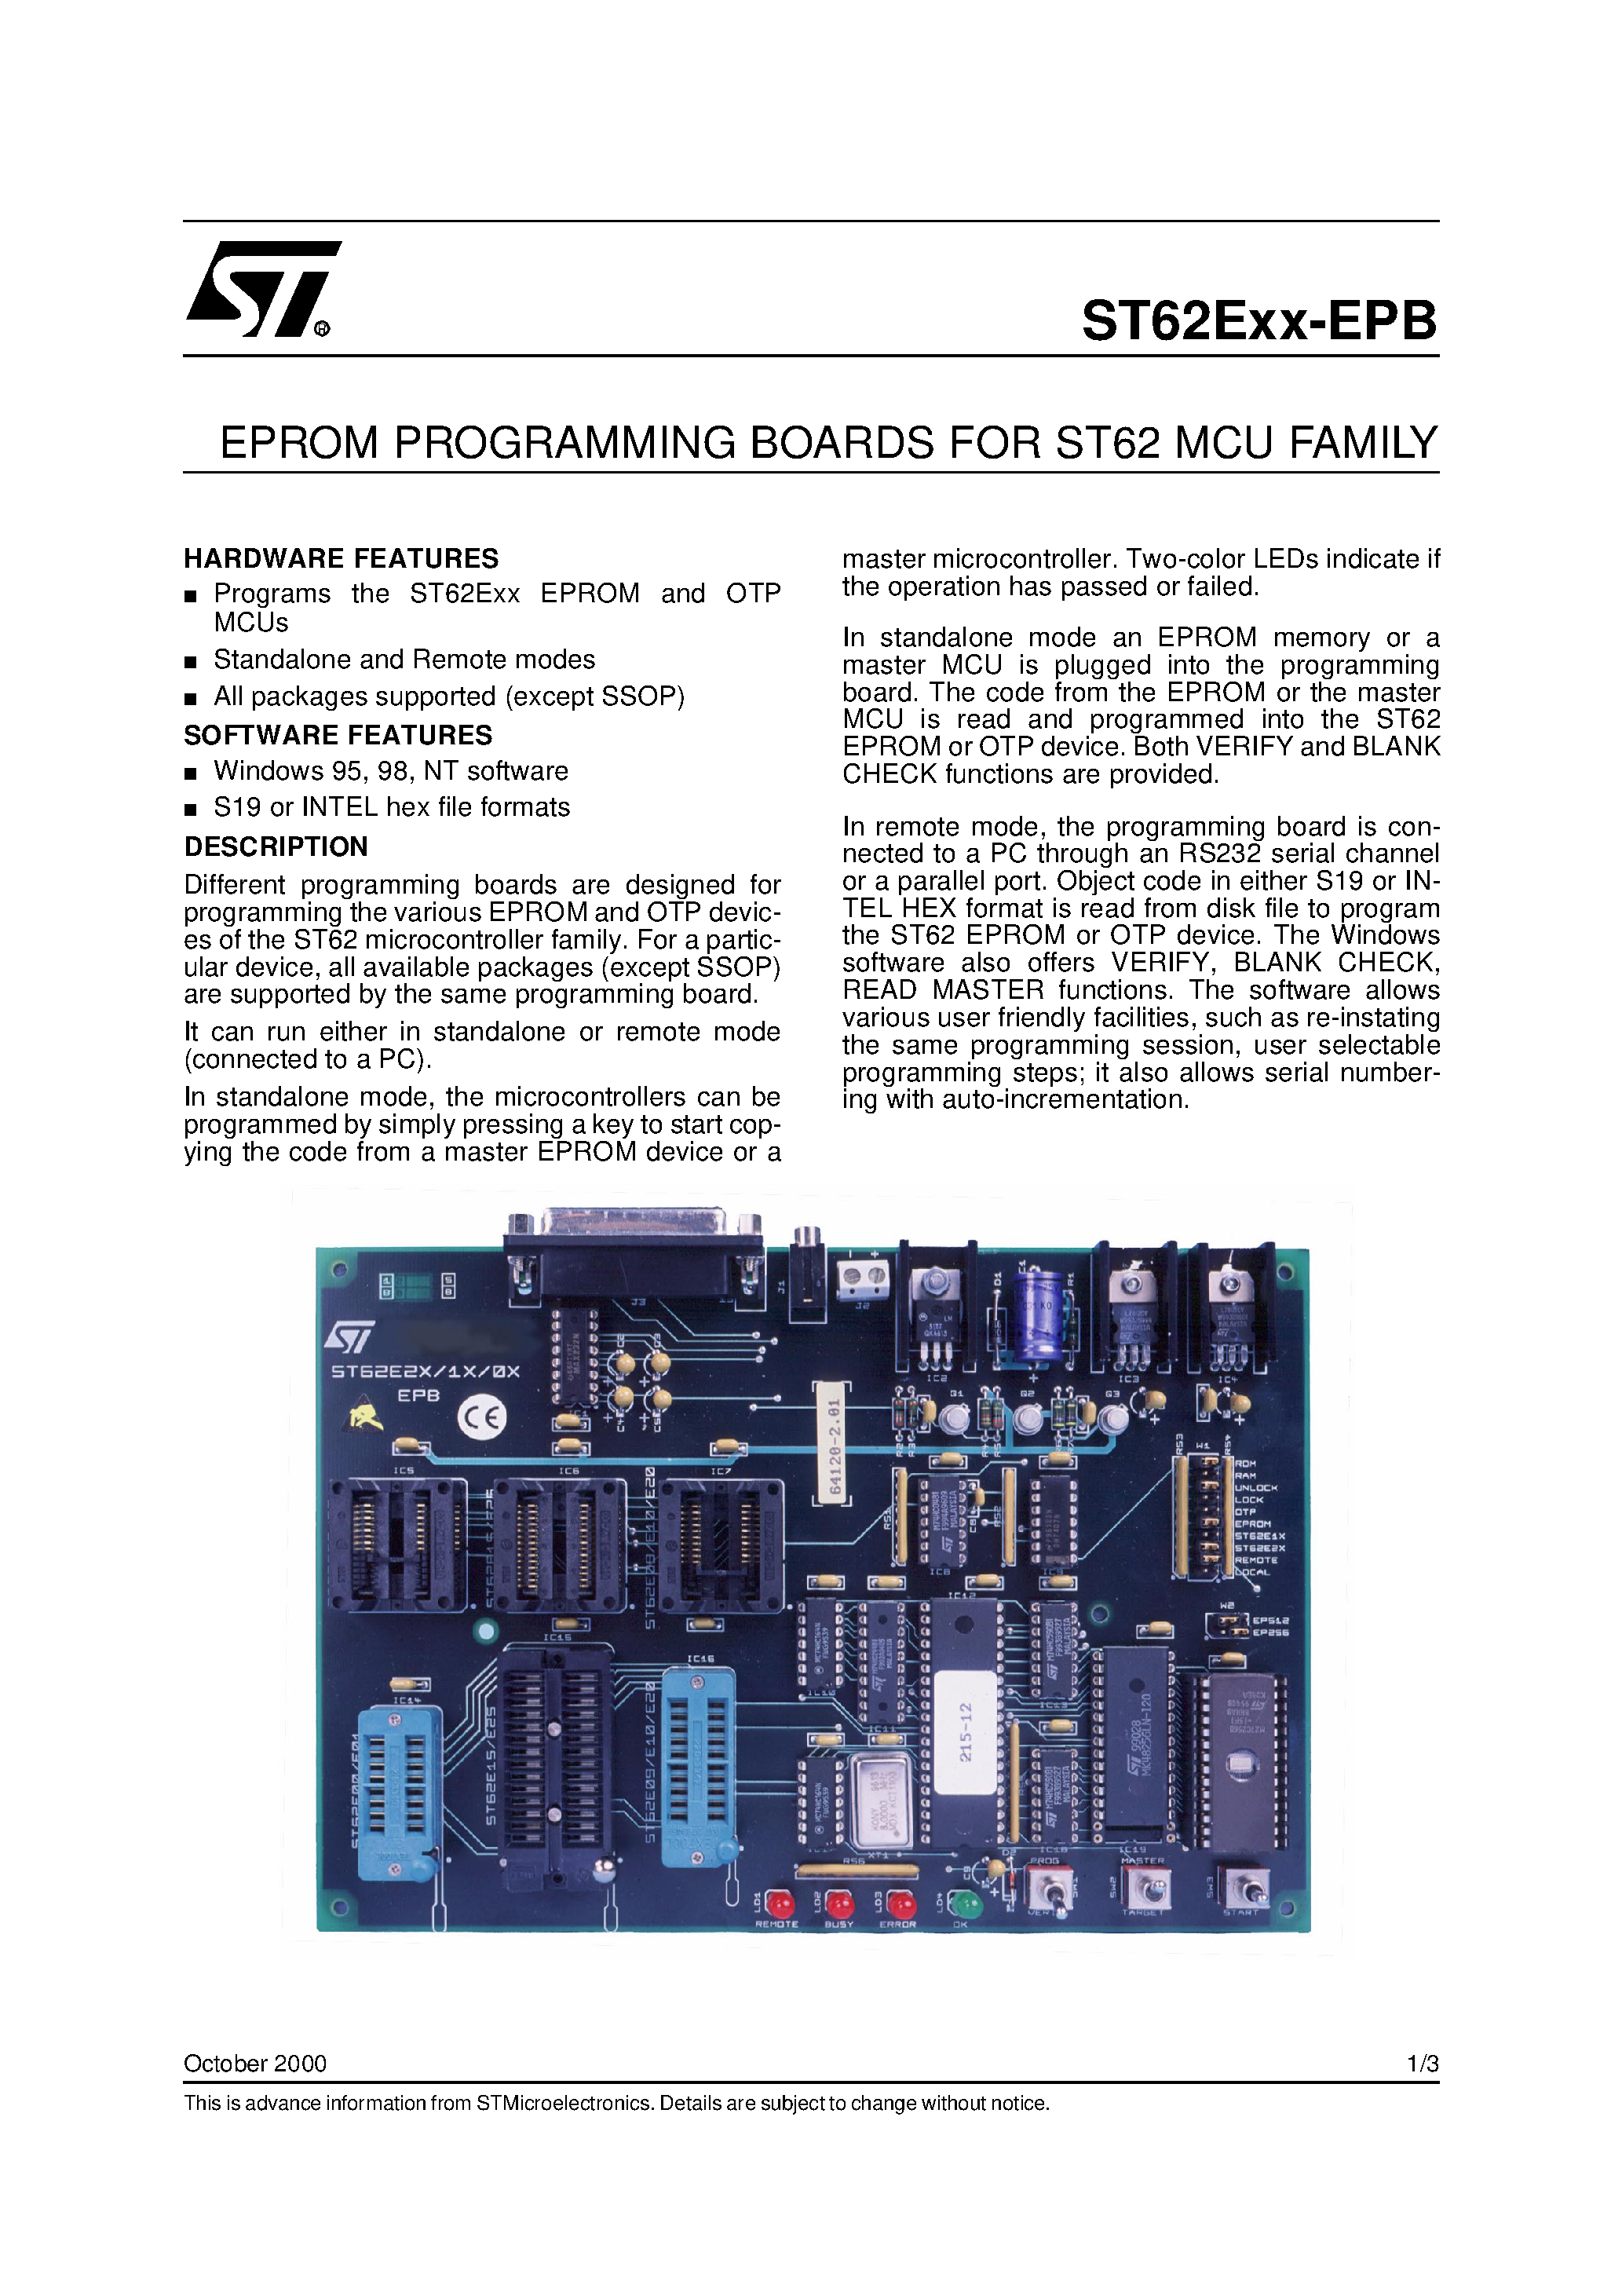 Даташит ST62T25 - EPROM PROGRAMMING BOARDS FOR ST62 MCU FAMILY страница 1